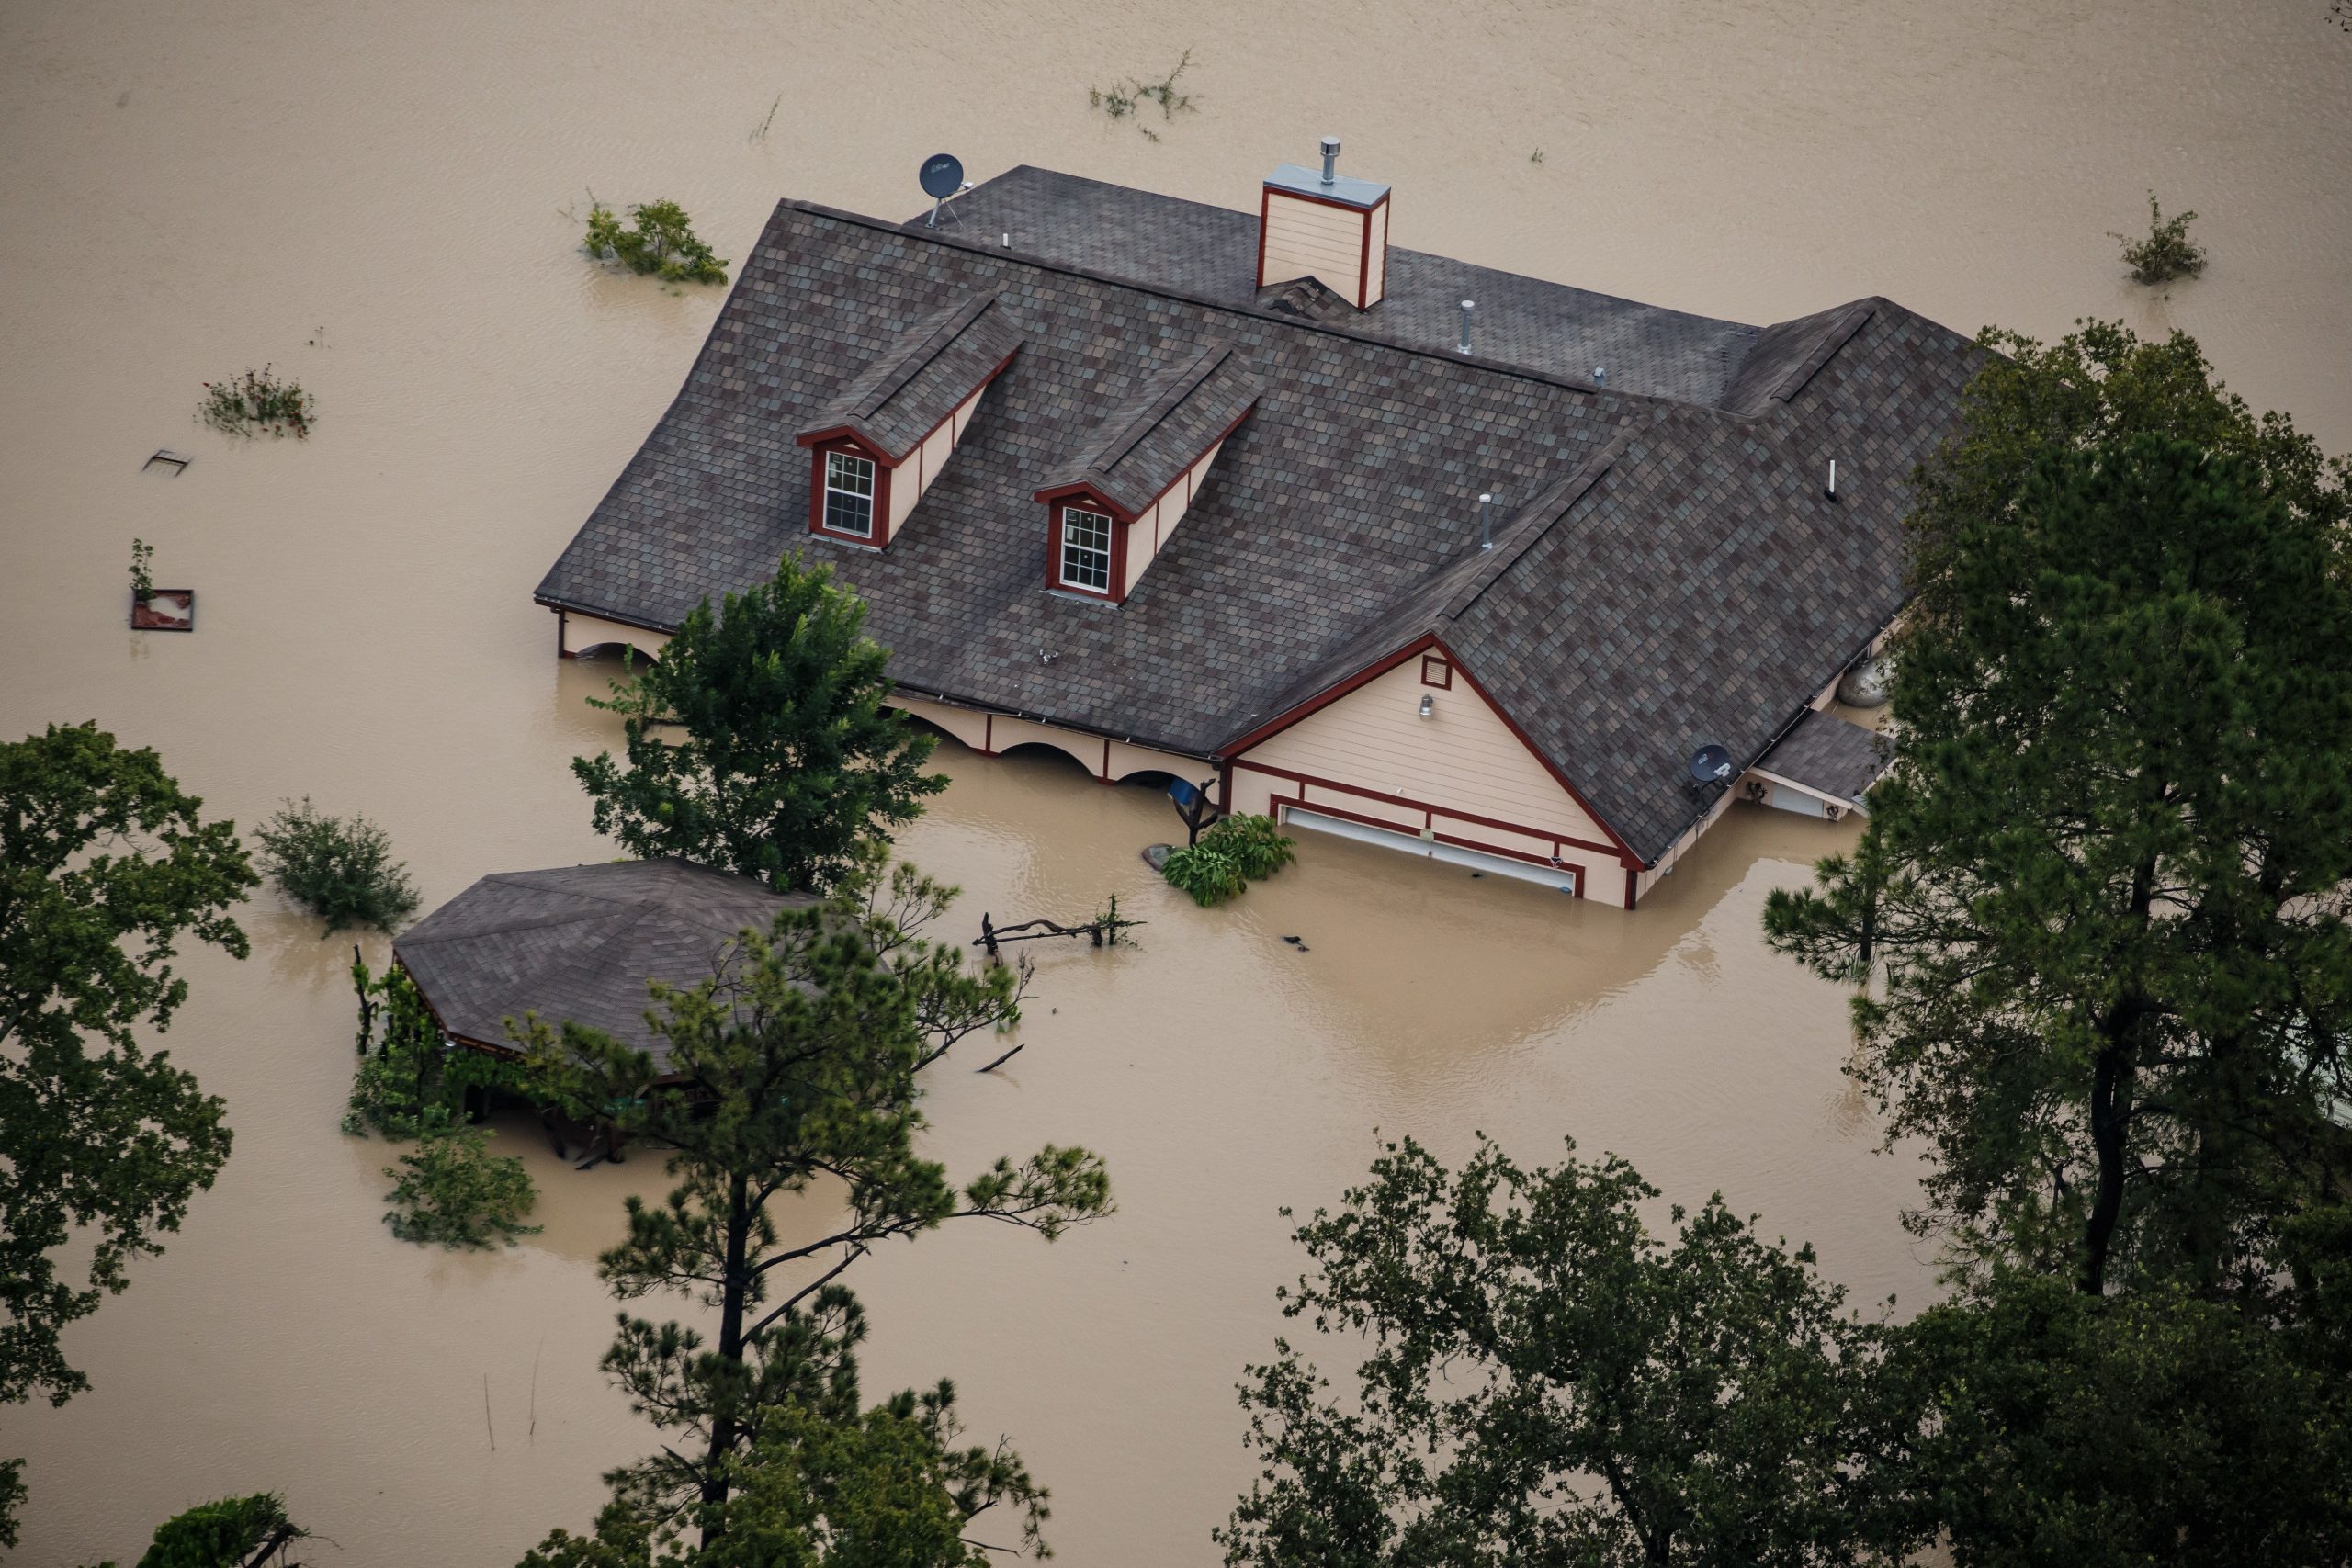 New to floods?  Here’s what the owner of an underwater home
should do